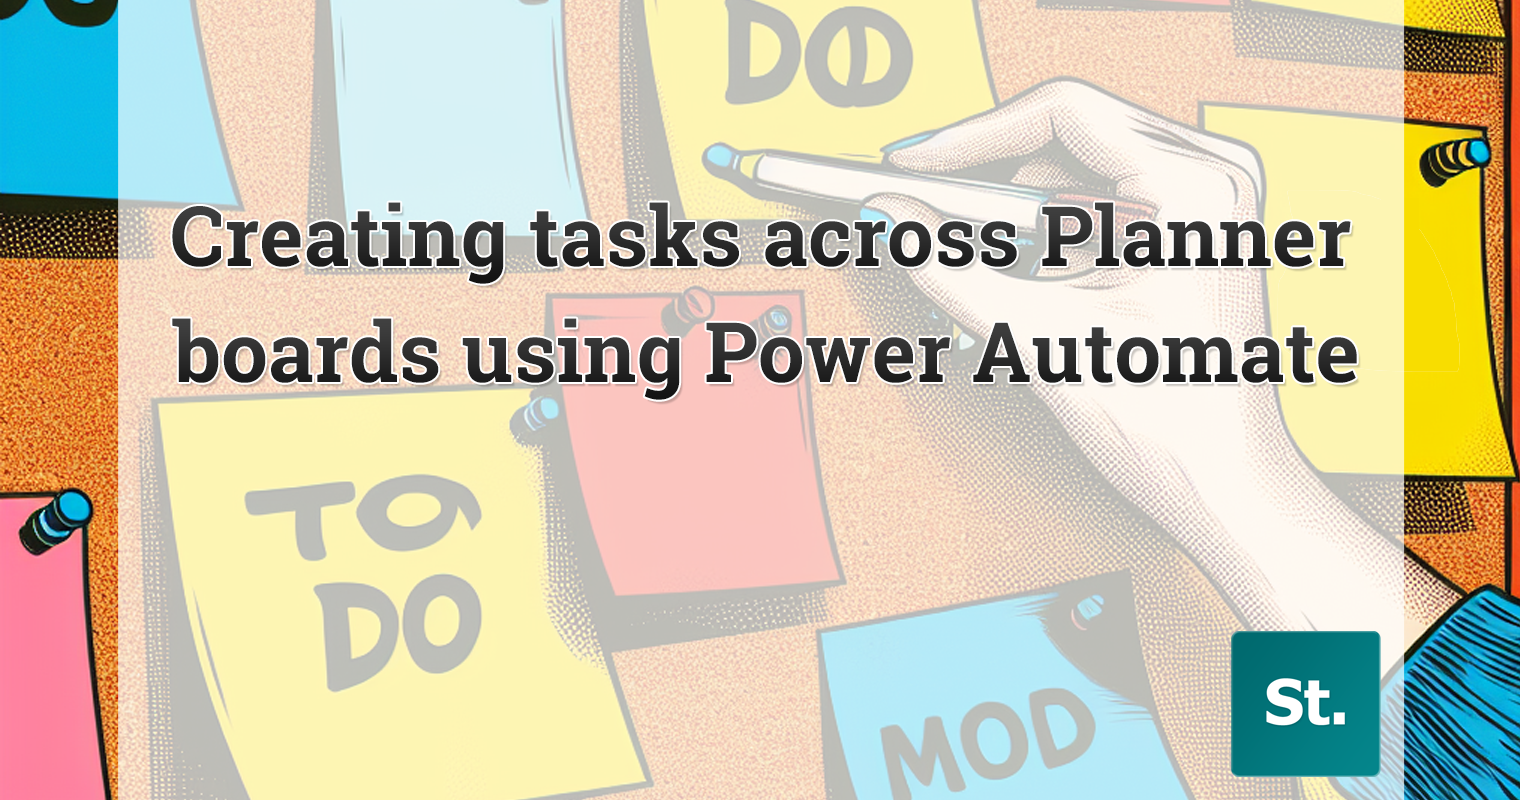 The problem(s) creating tasks across different boards in Planner using Power Automate